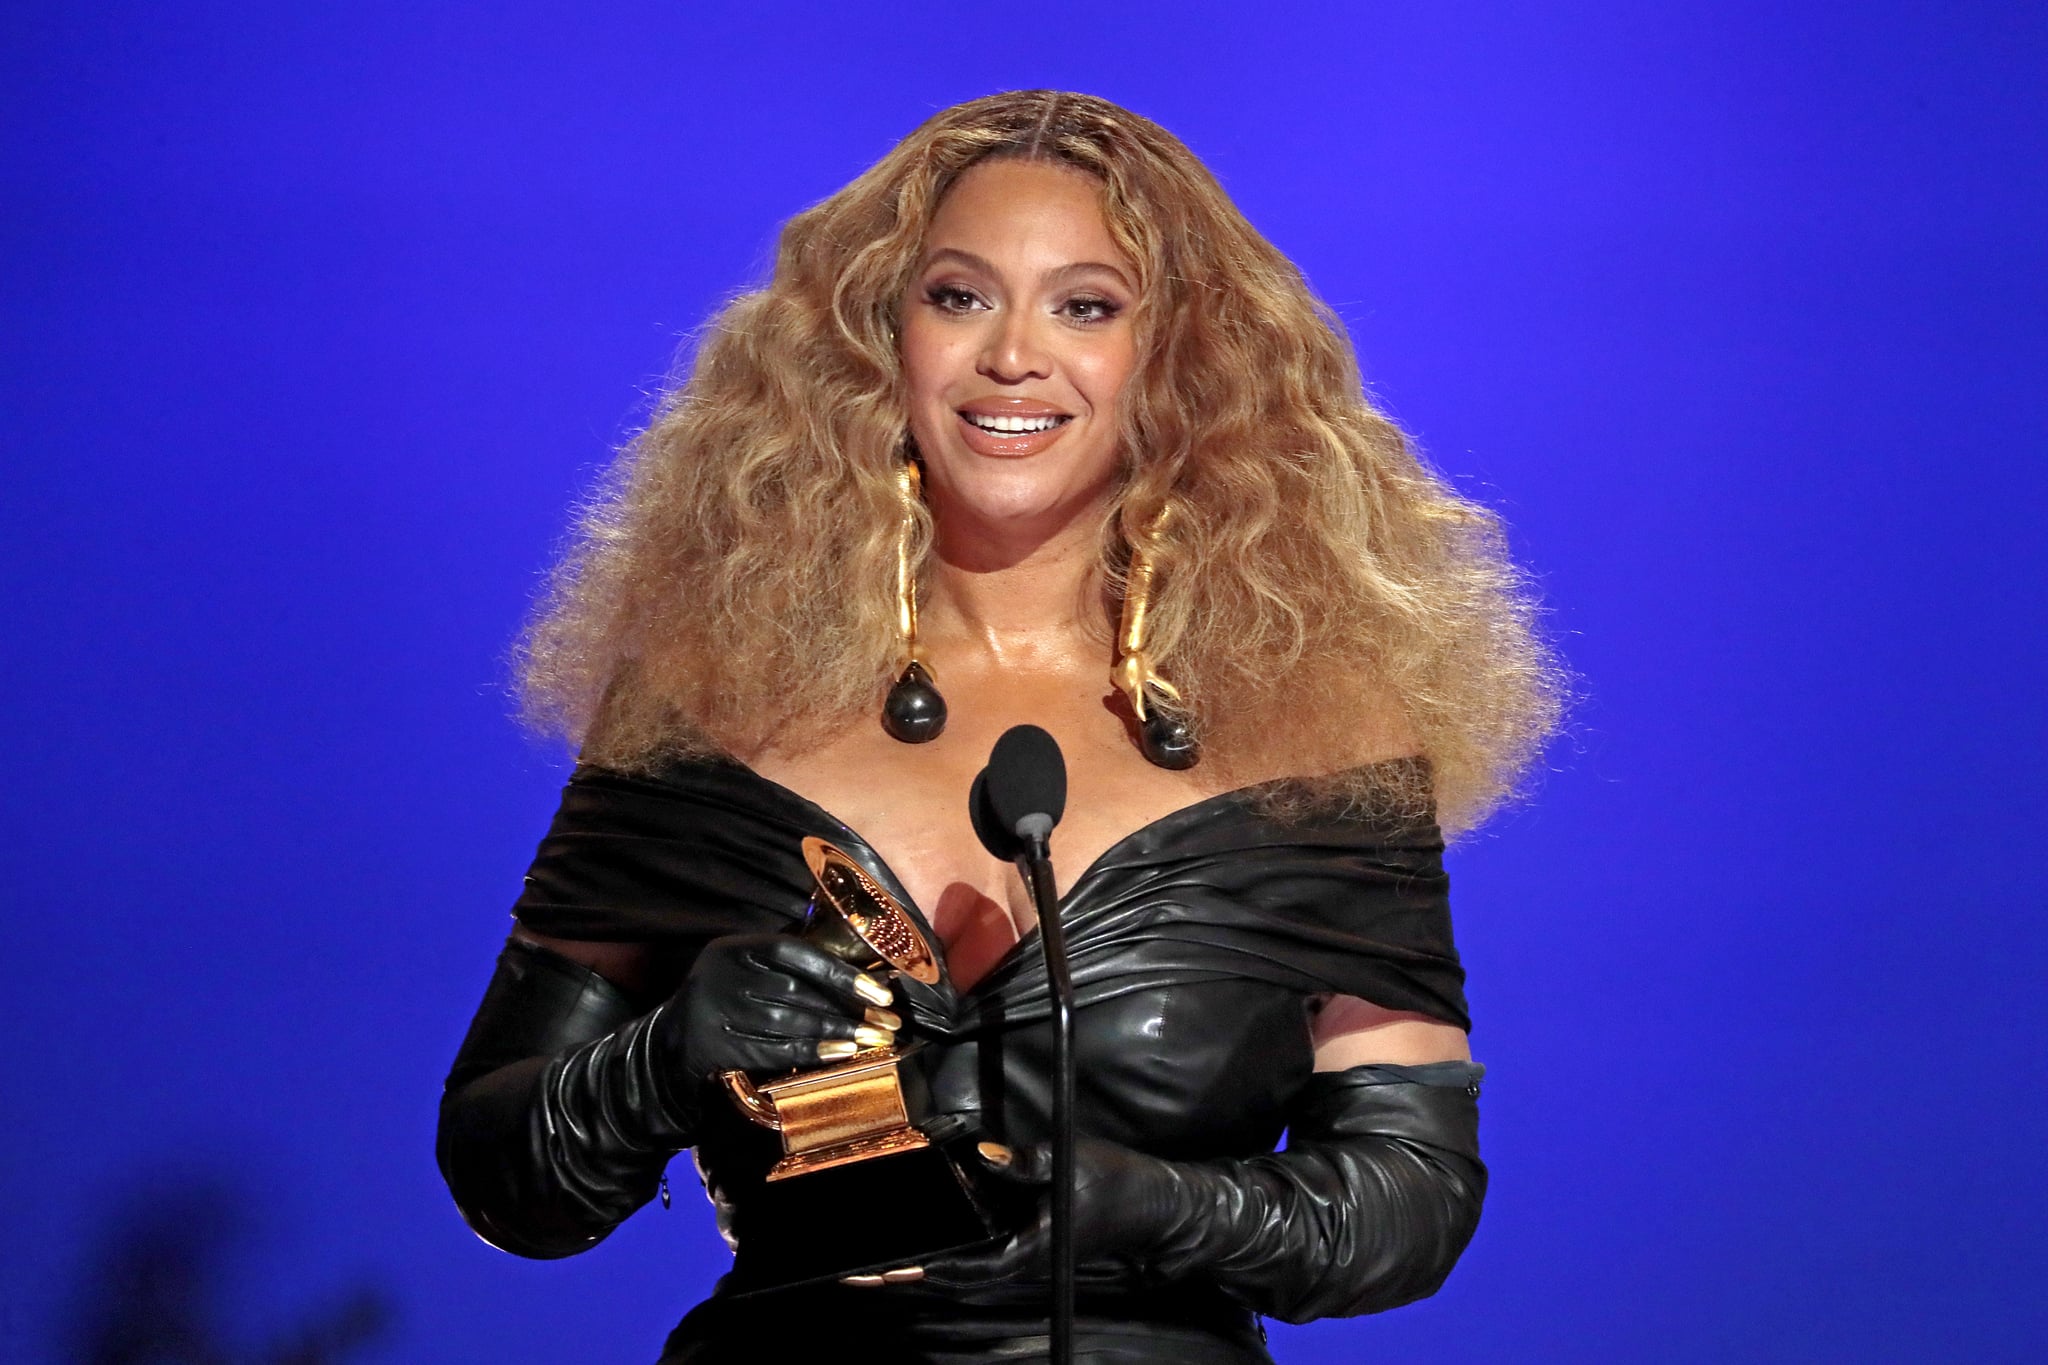 Los Angeles, CA, Sunday, March 14, 2021 - Beyonce makes History with the Best E&B Performance winning 28 Grammys, more that any female or male performer, accepts the award for Best R&B Performance at the 63rd Grammy Award outside Staples Centre. (Robert Gauthier/Los Angeles Times via Getty Images)Los Angeles, CA, Sunday, March 14, 2021 - Beyonce makes History with the Best E&B Performance winning 28 Grammys, more that any female or male performer, accepts the award for Best R&B Performance at the 63rd Grammy Award outside Staples Centre. (Robert Gauthier/Los Angeles Times via Getty Images)